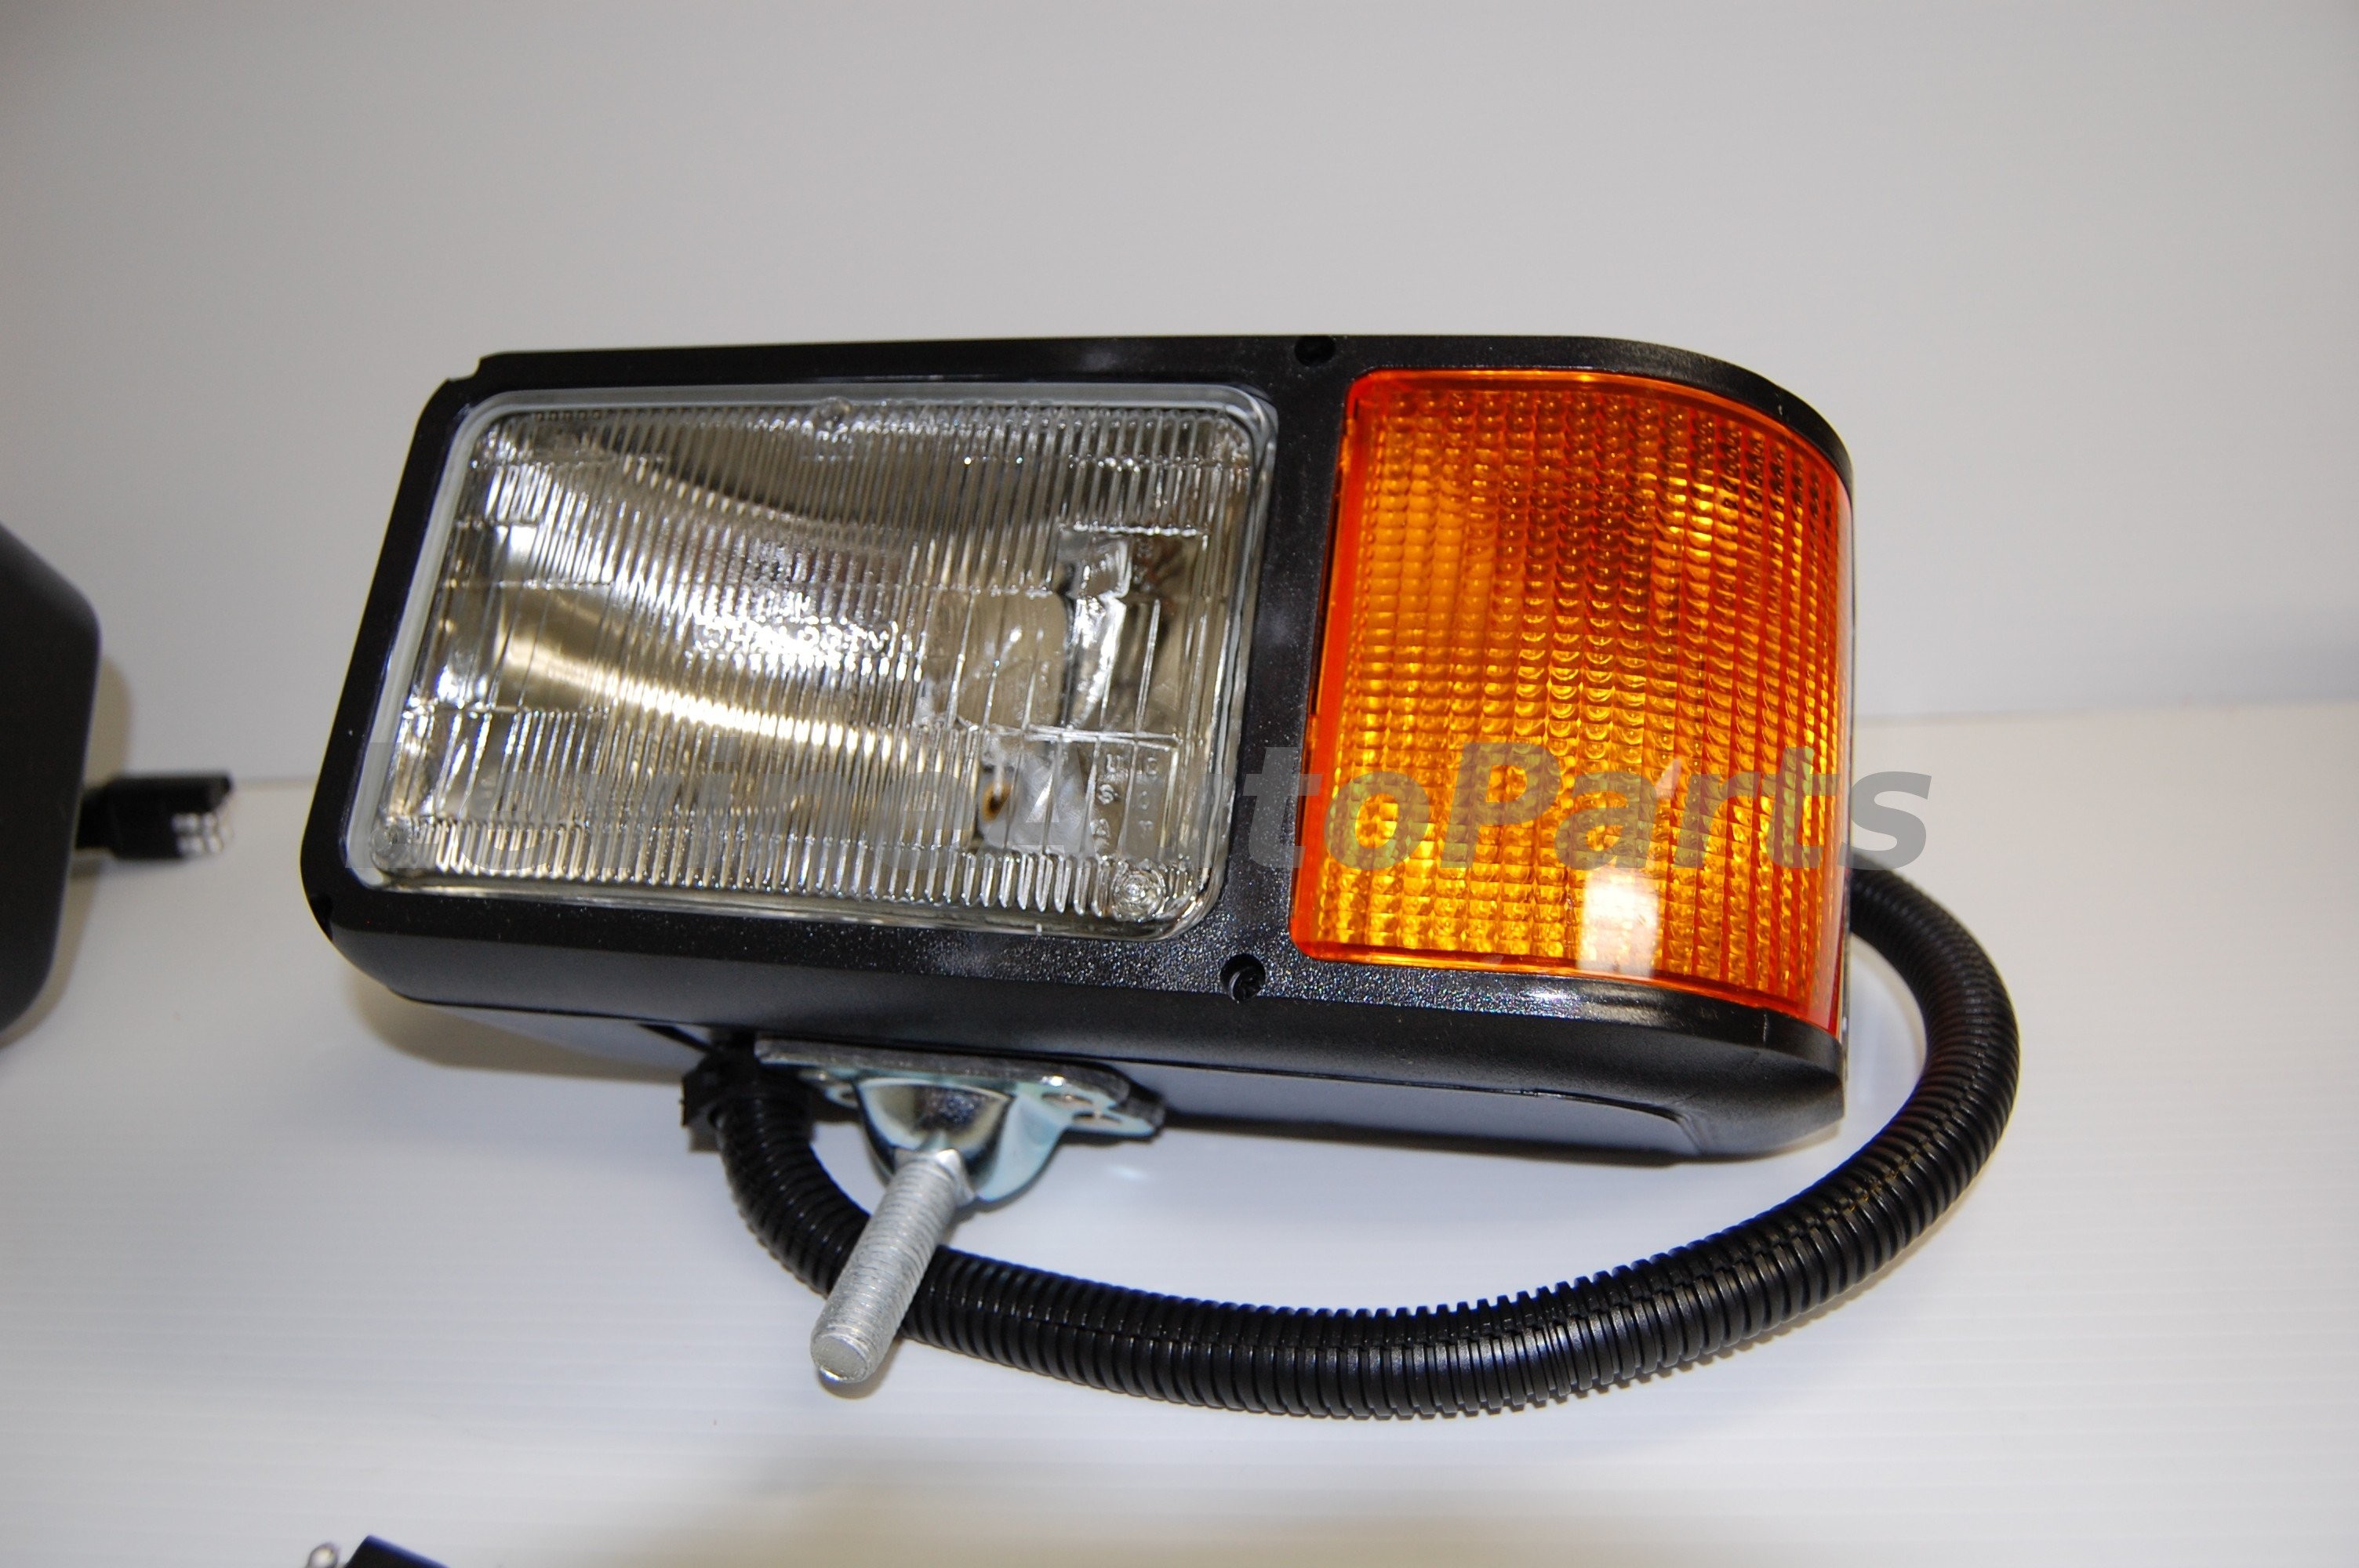 Grote Plow Light Awesome Grote Plow Lights Best Grote Plow Light Inspirational Snow Plow Lights